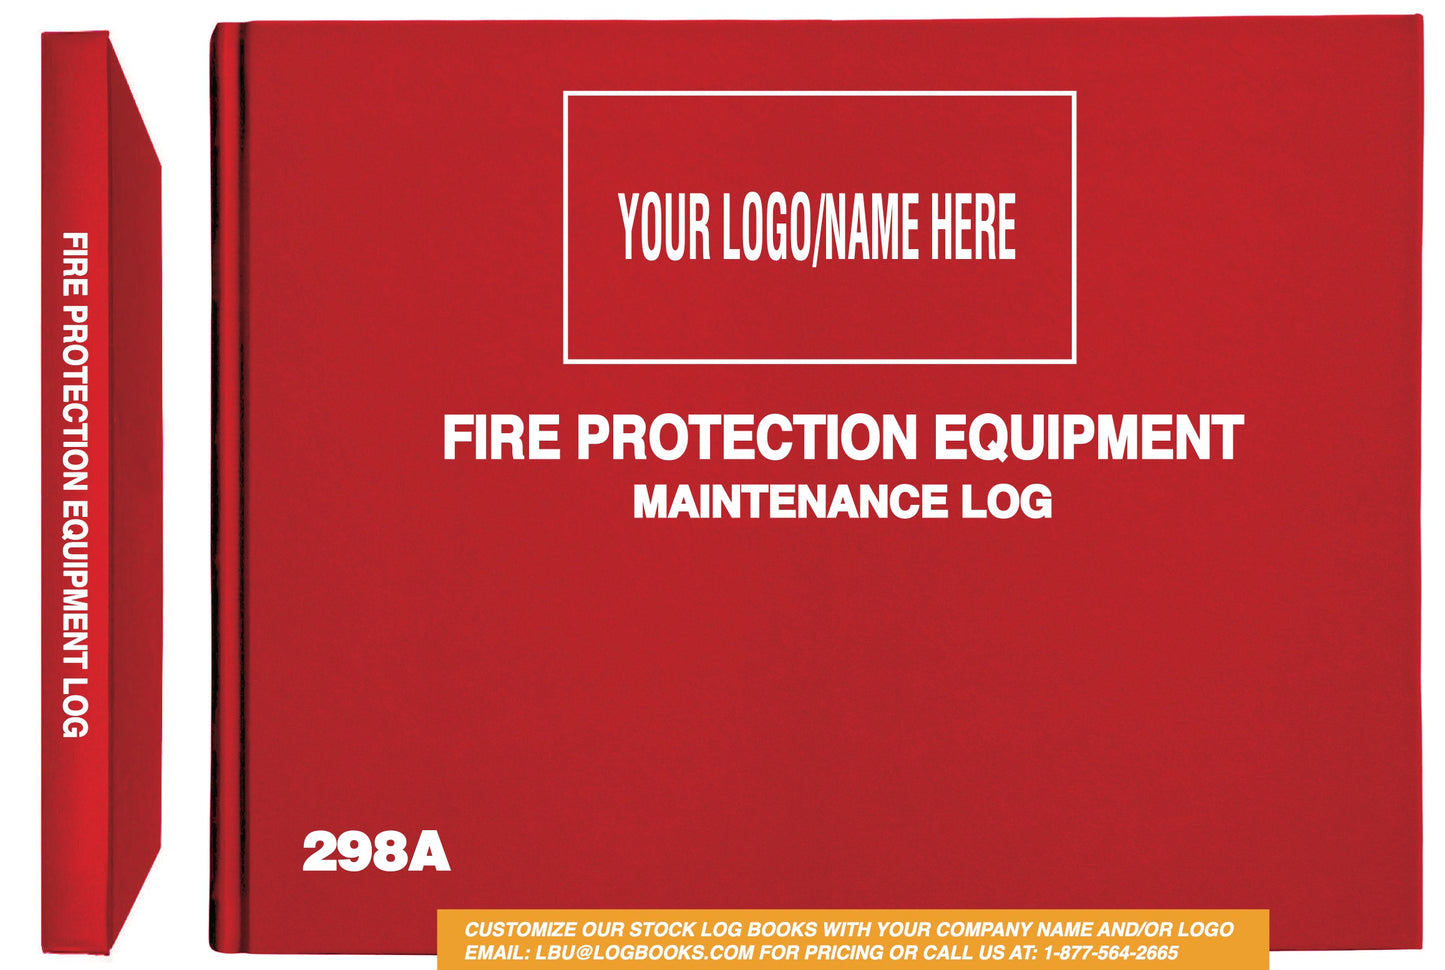 Fire Protection Equipment Log Book #298A